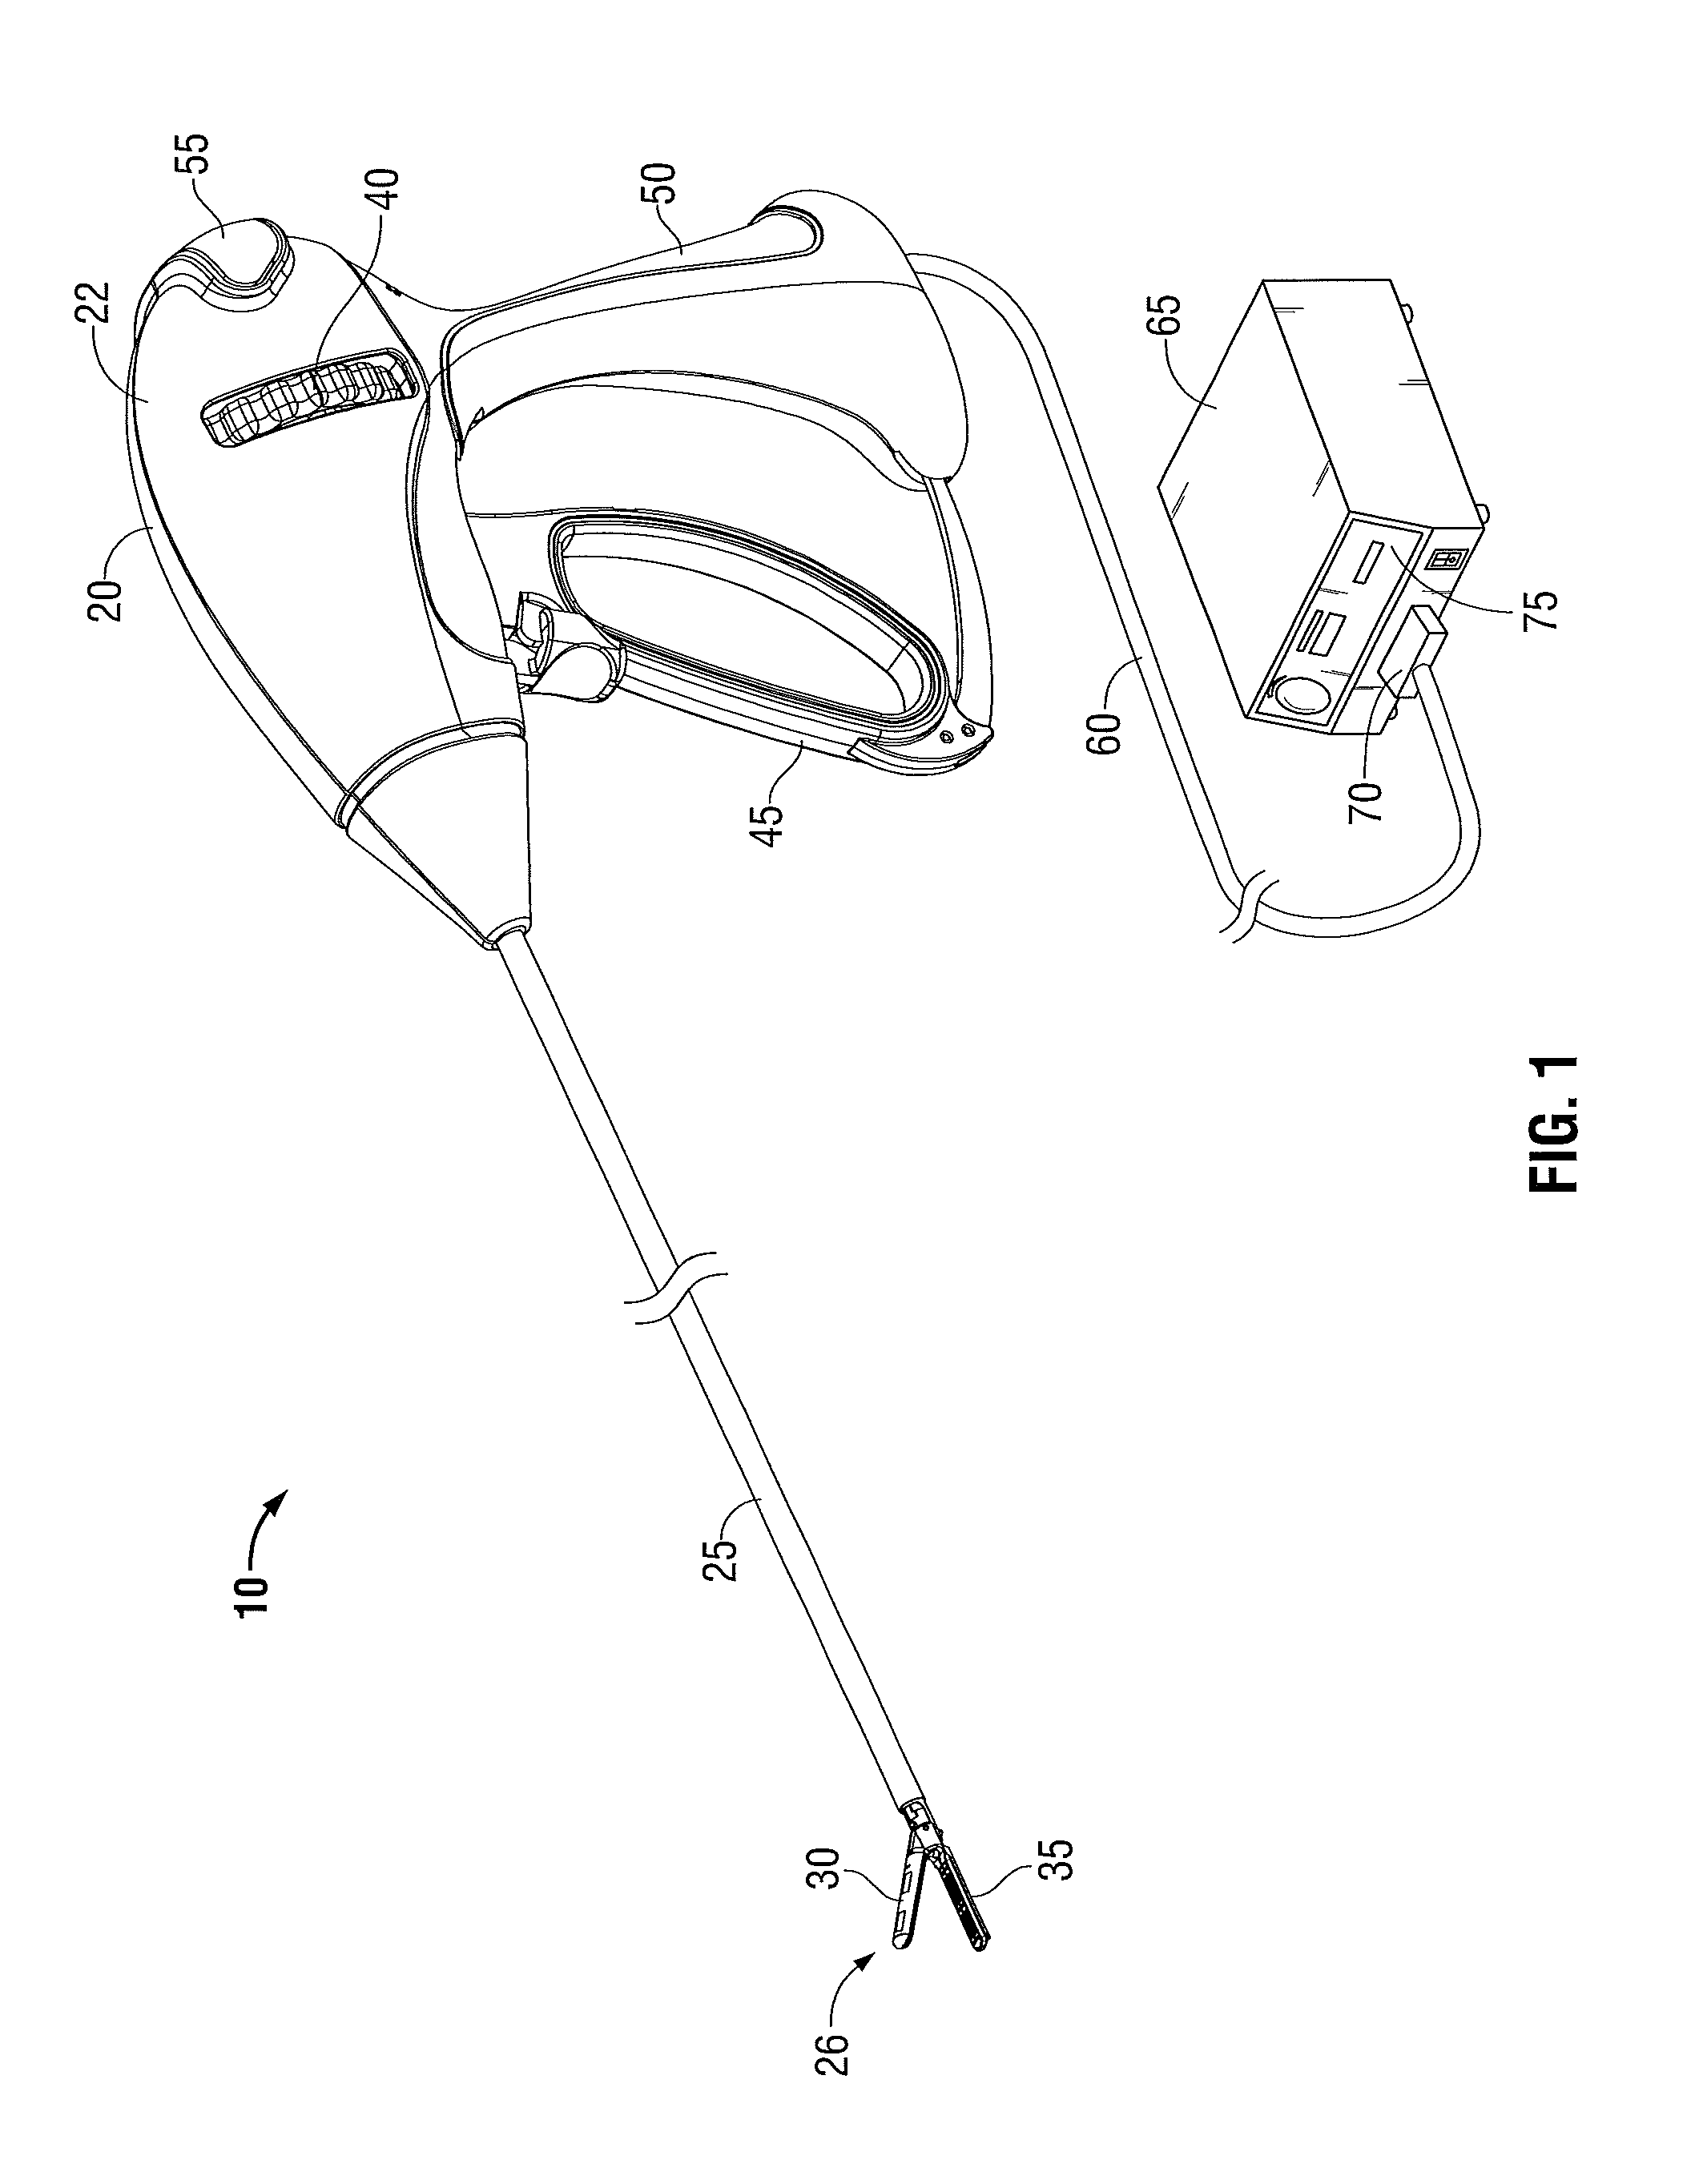 Systems and methods for treatment of premenstrual dysphoric disorders